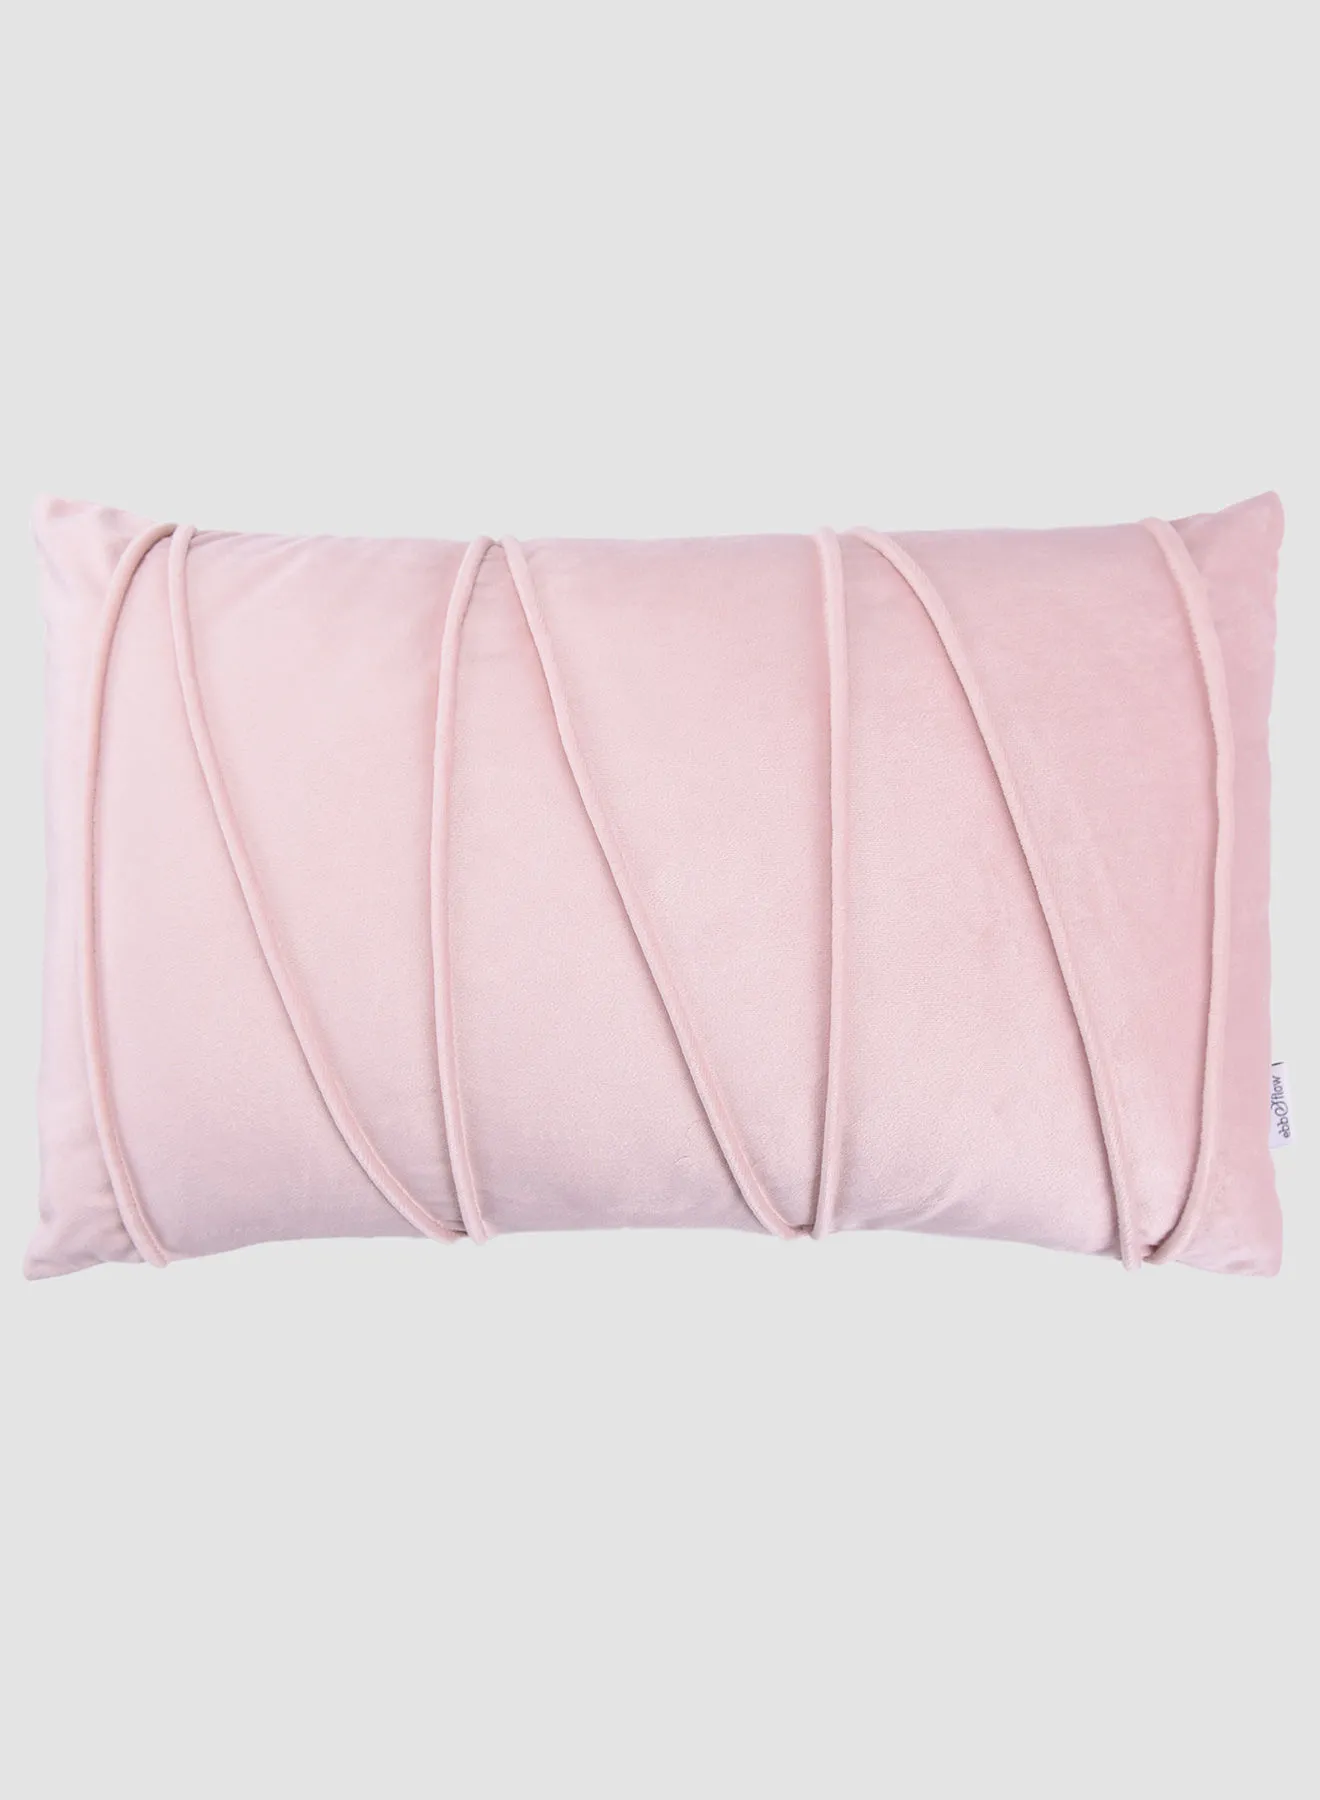 ebb & flow 3D Velvet Cushion  II,Unique Luxury Quality Decor Items for the Perfect Stylish Home Pink 30 x 50cm